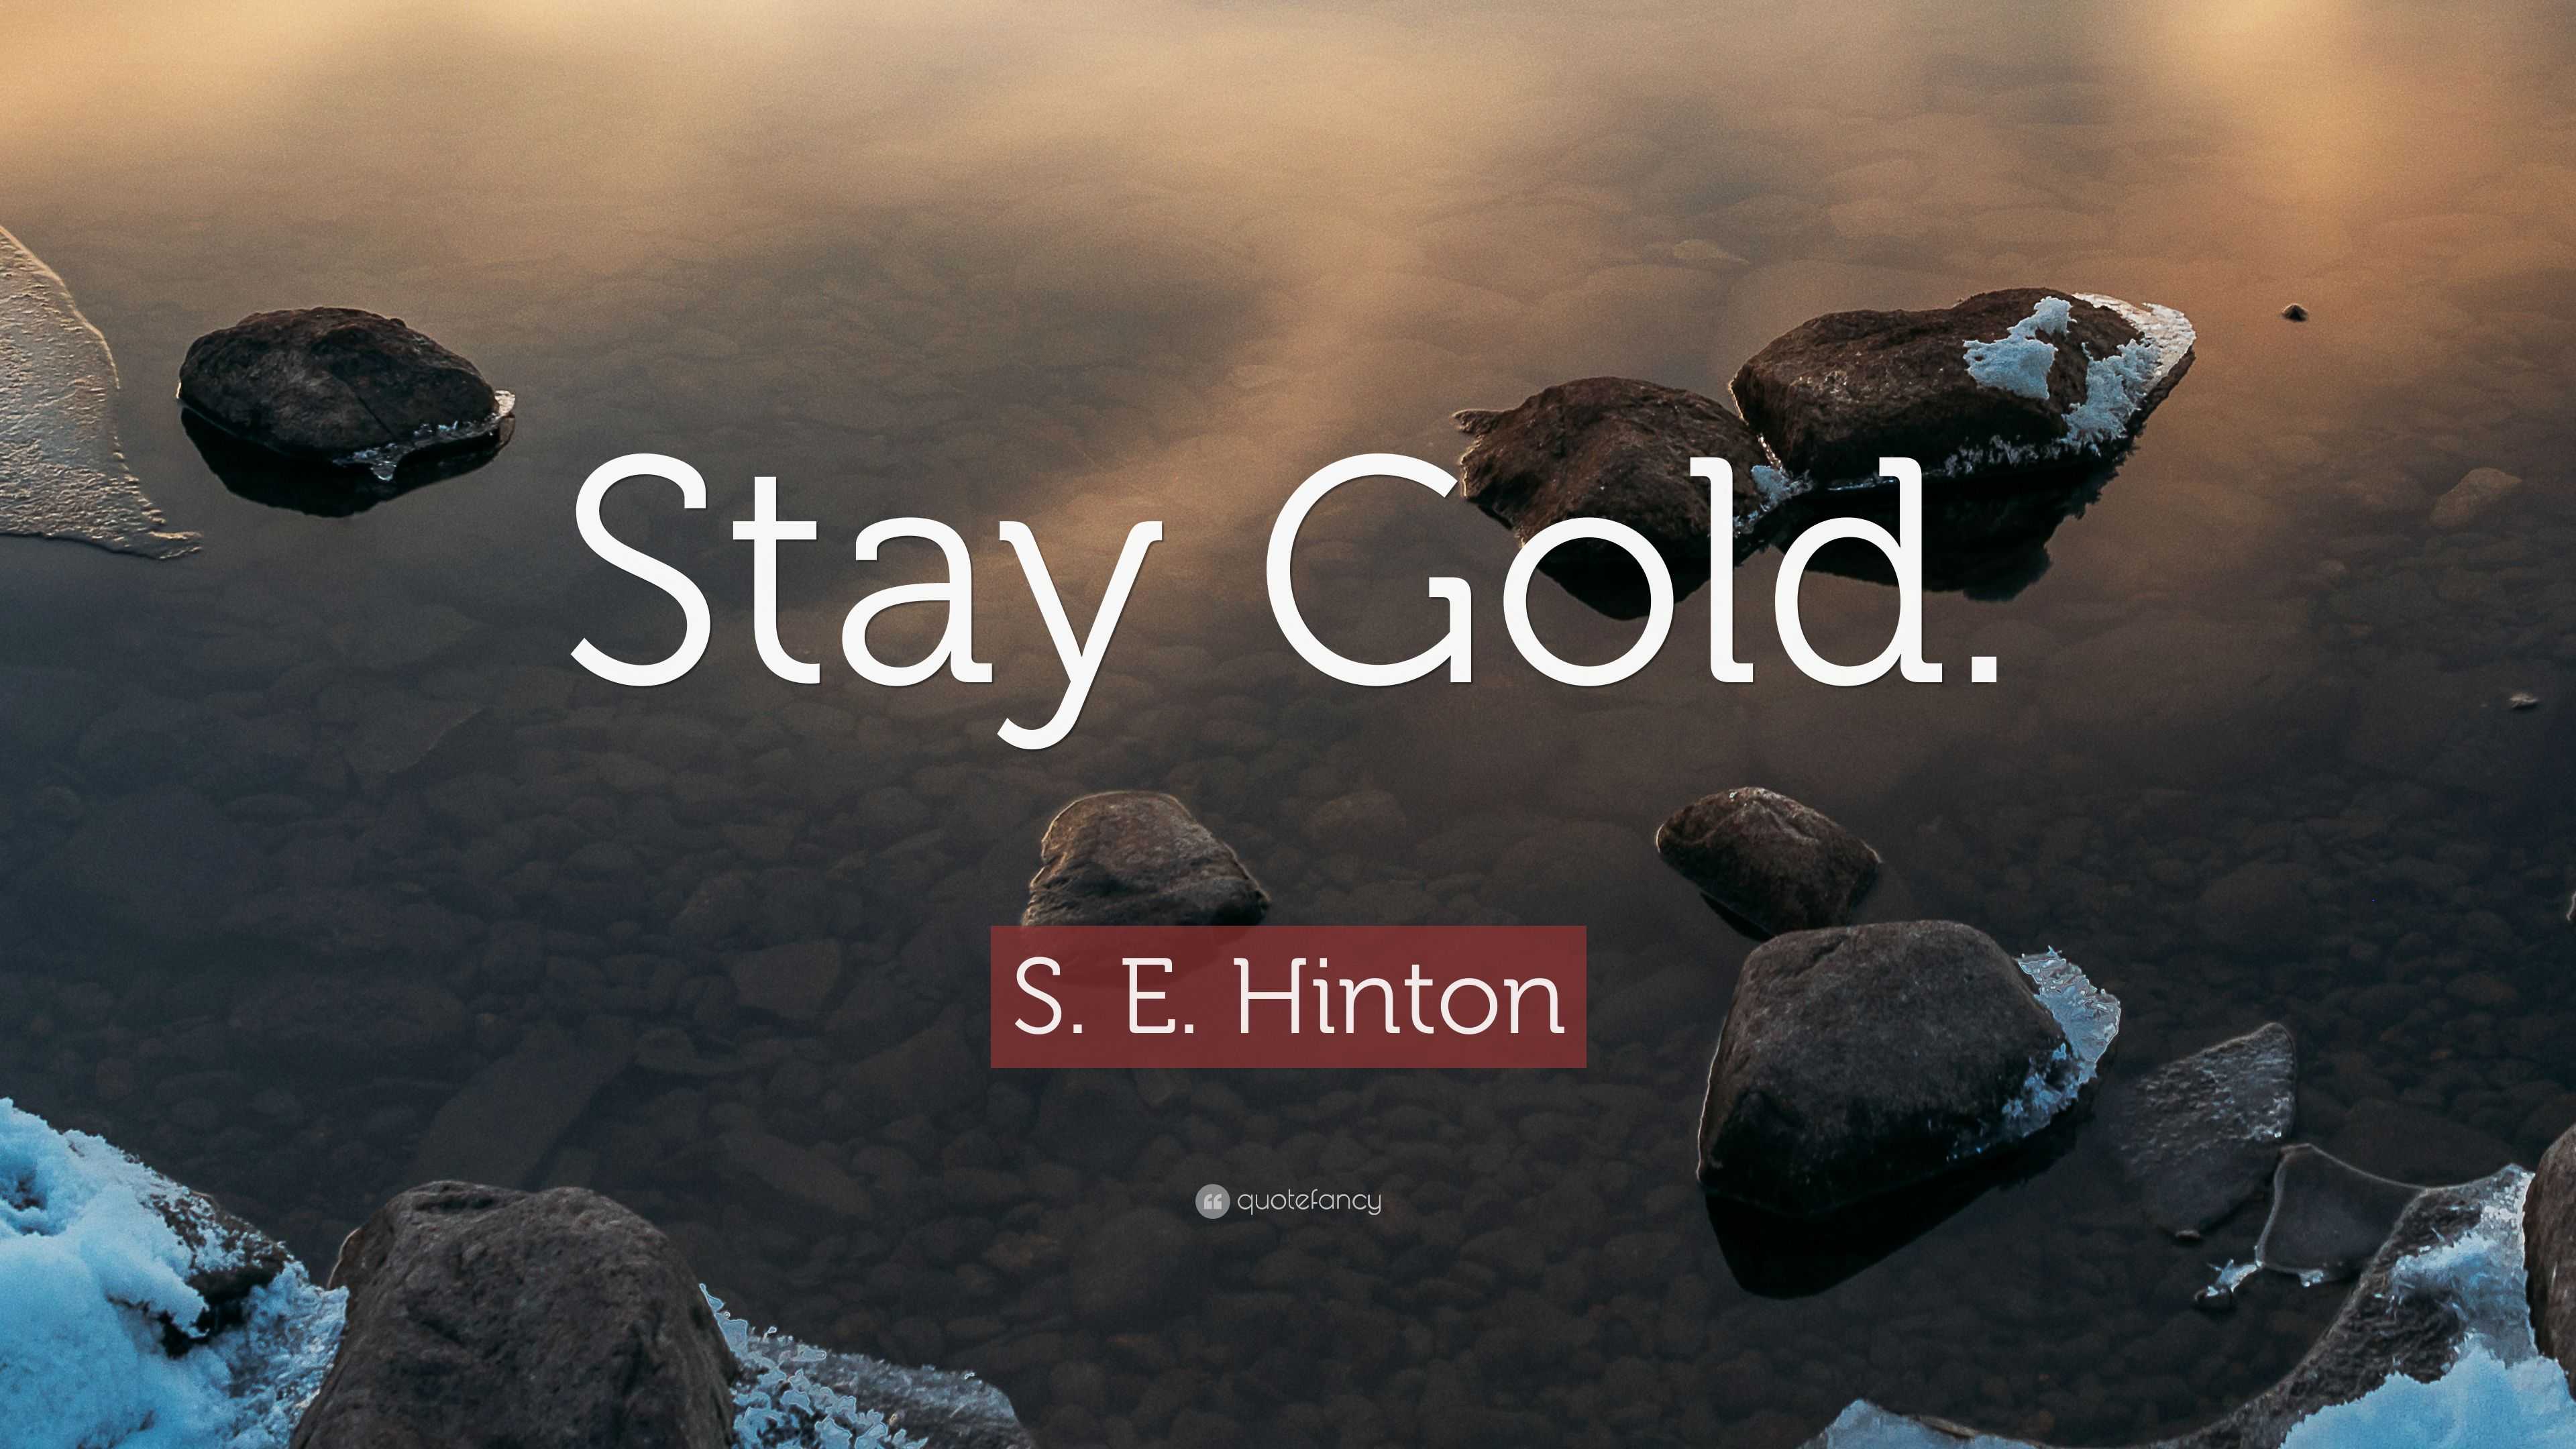 S. E. Hinton Quote: "Stay Gold." (9 wallpapers) - Quotefancy